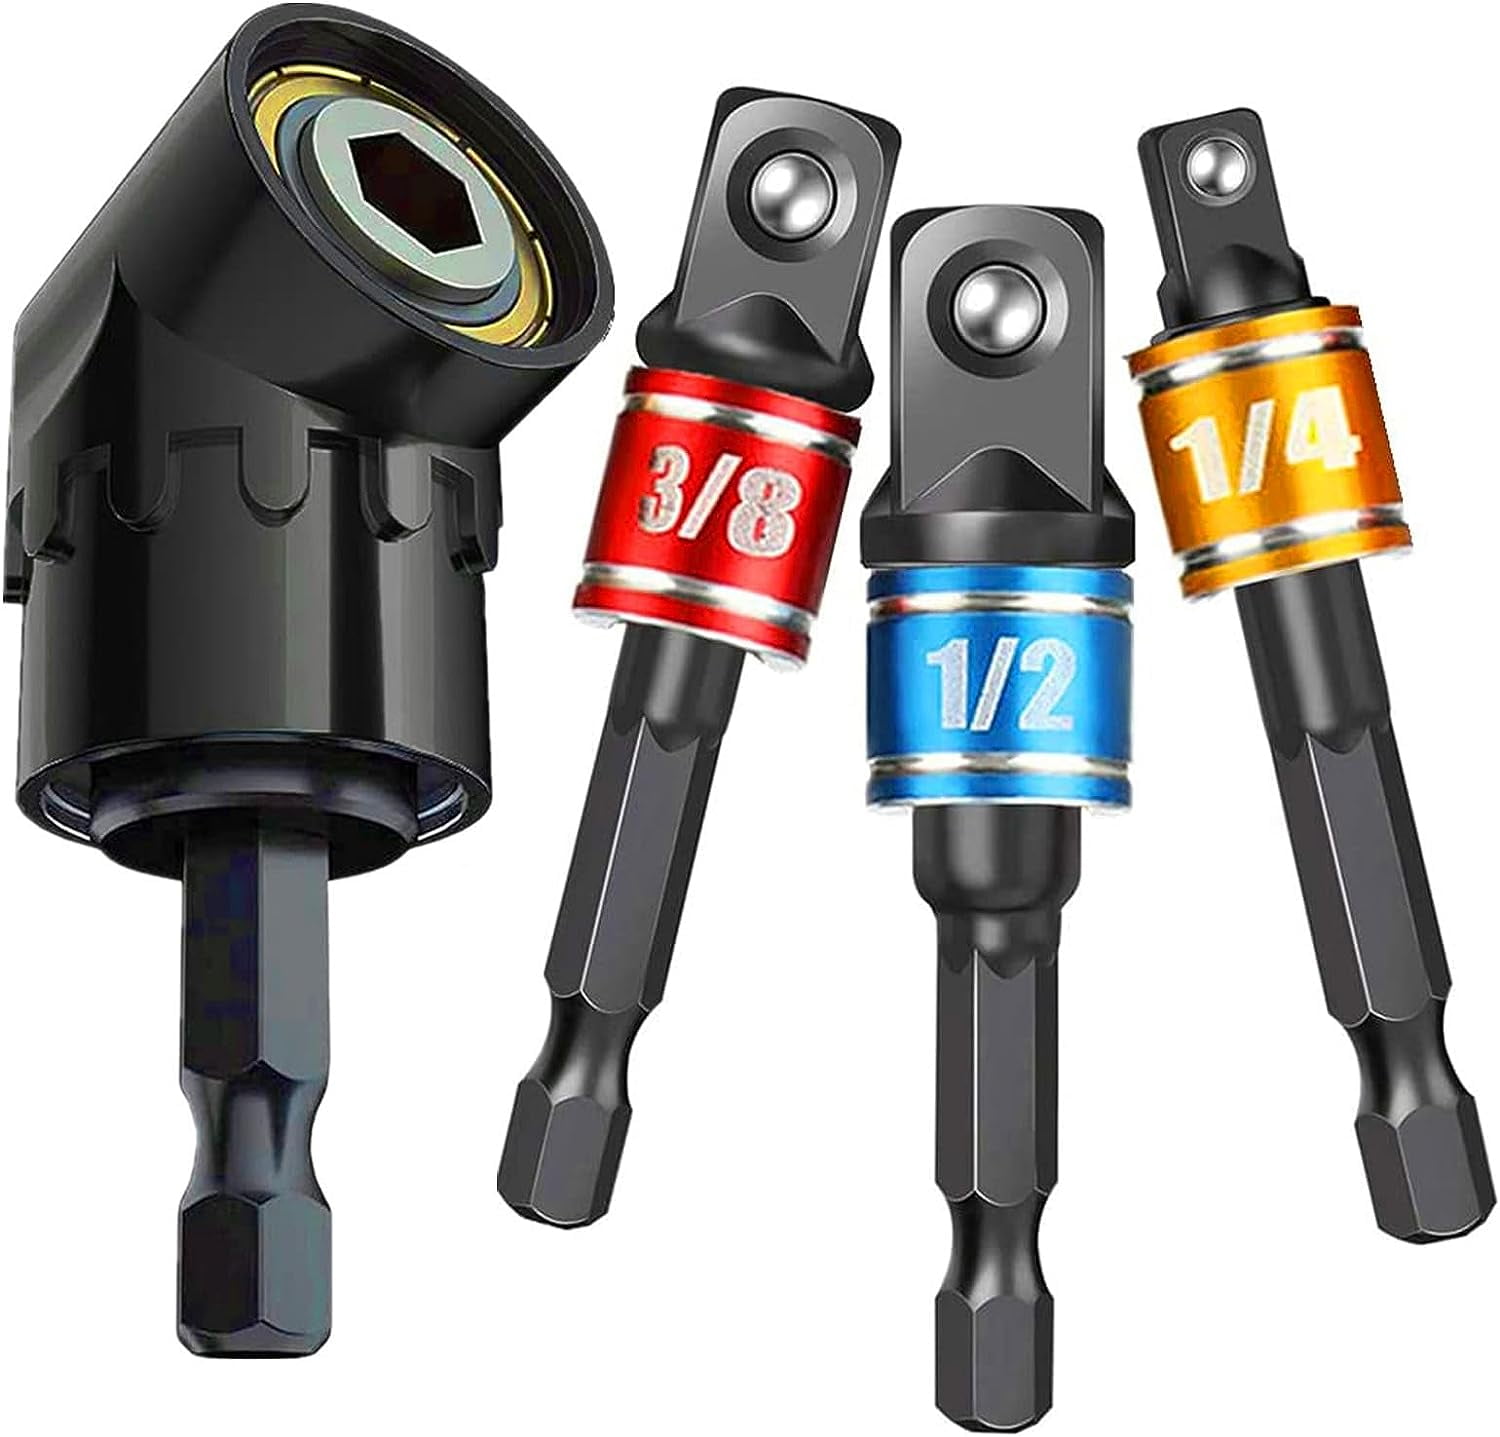 Right Angle Drill Attachment Set, Including Flexible Drill Bit Extension,  3pcs Angle Extension Power Drill Attachment with 1/4'' Hex Impact Shank